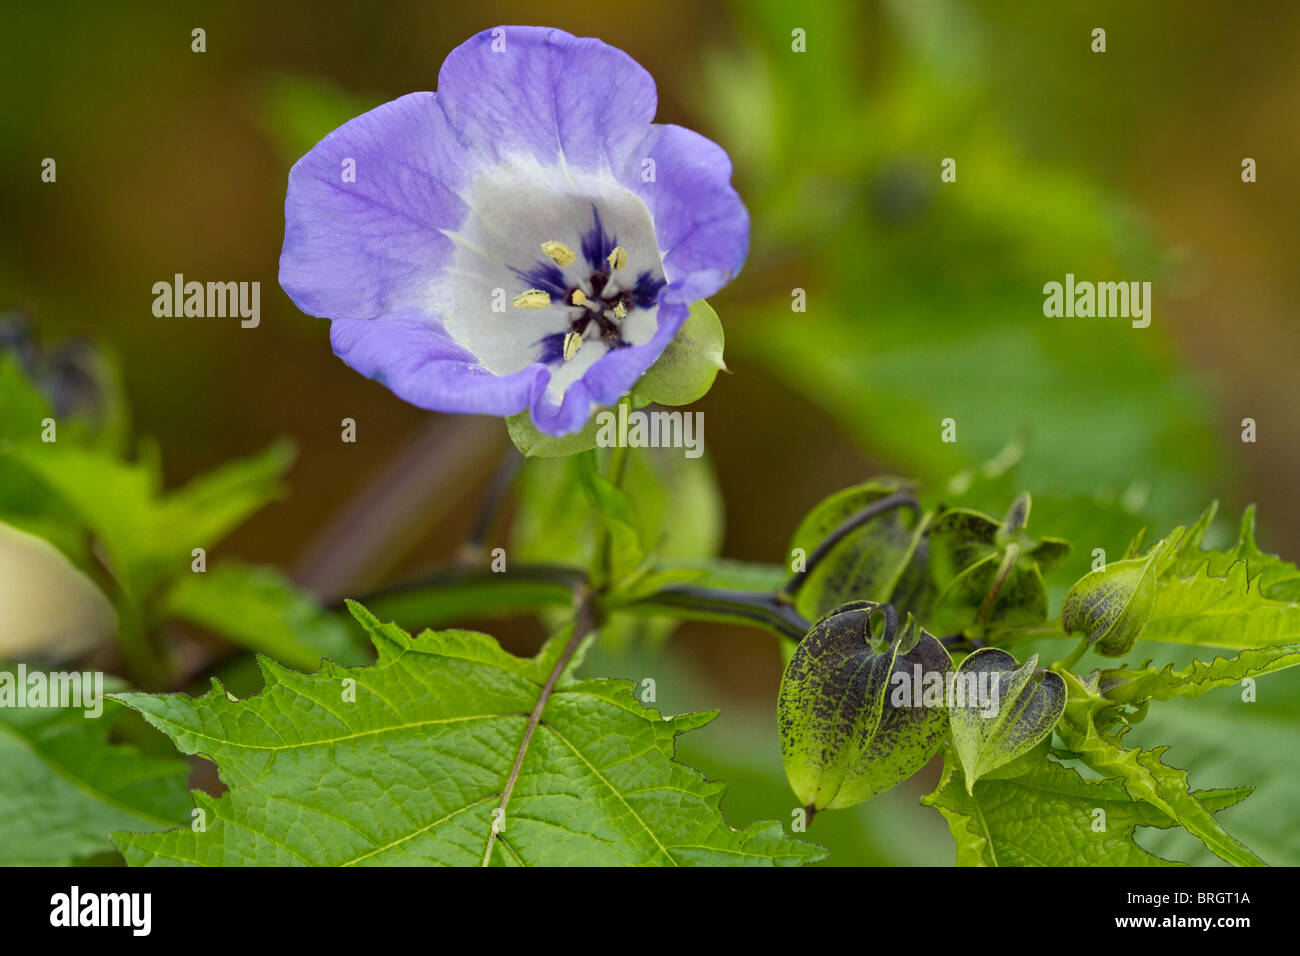 Lavender and white flowers of the Shoo Fly Plant (Nicandra physalodes) in bloom in autumn in UK Stock Photo